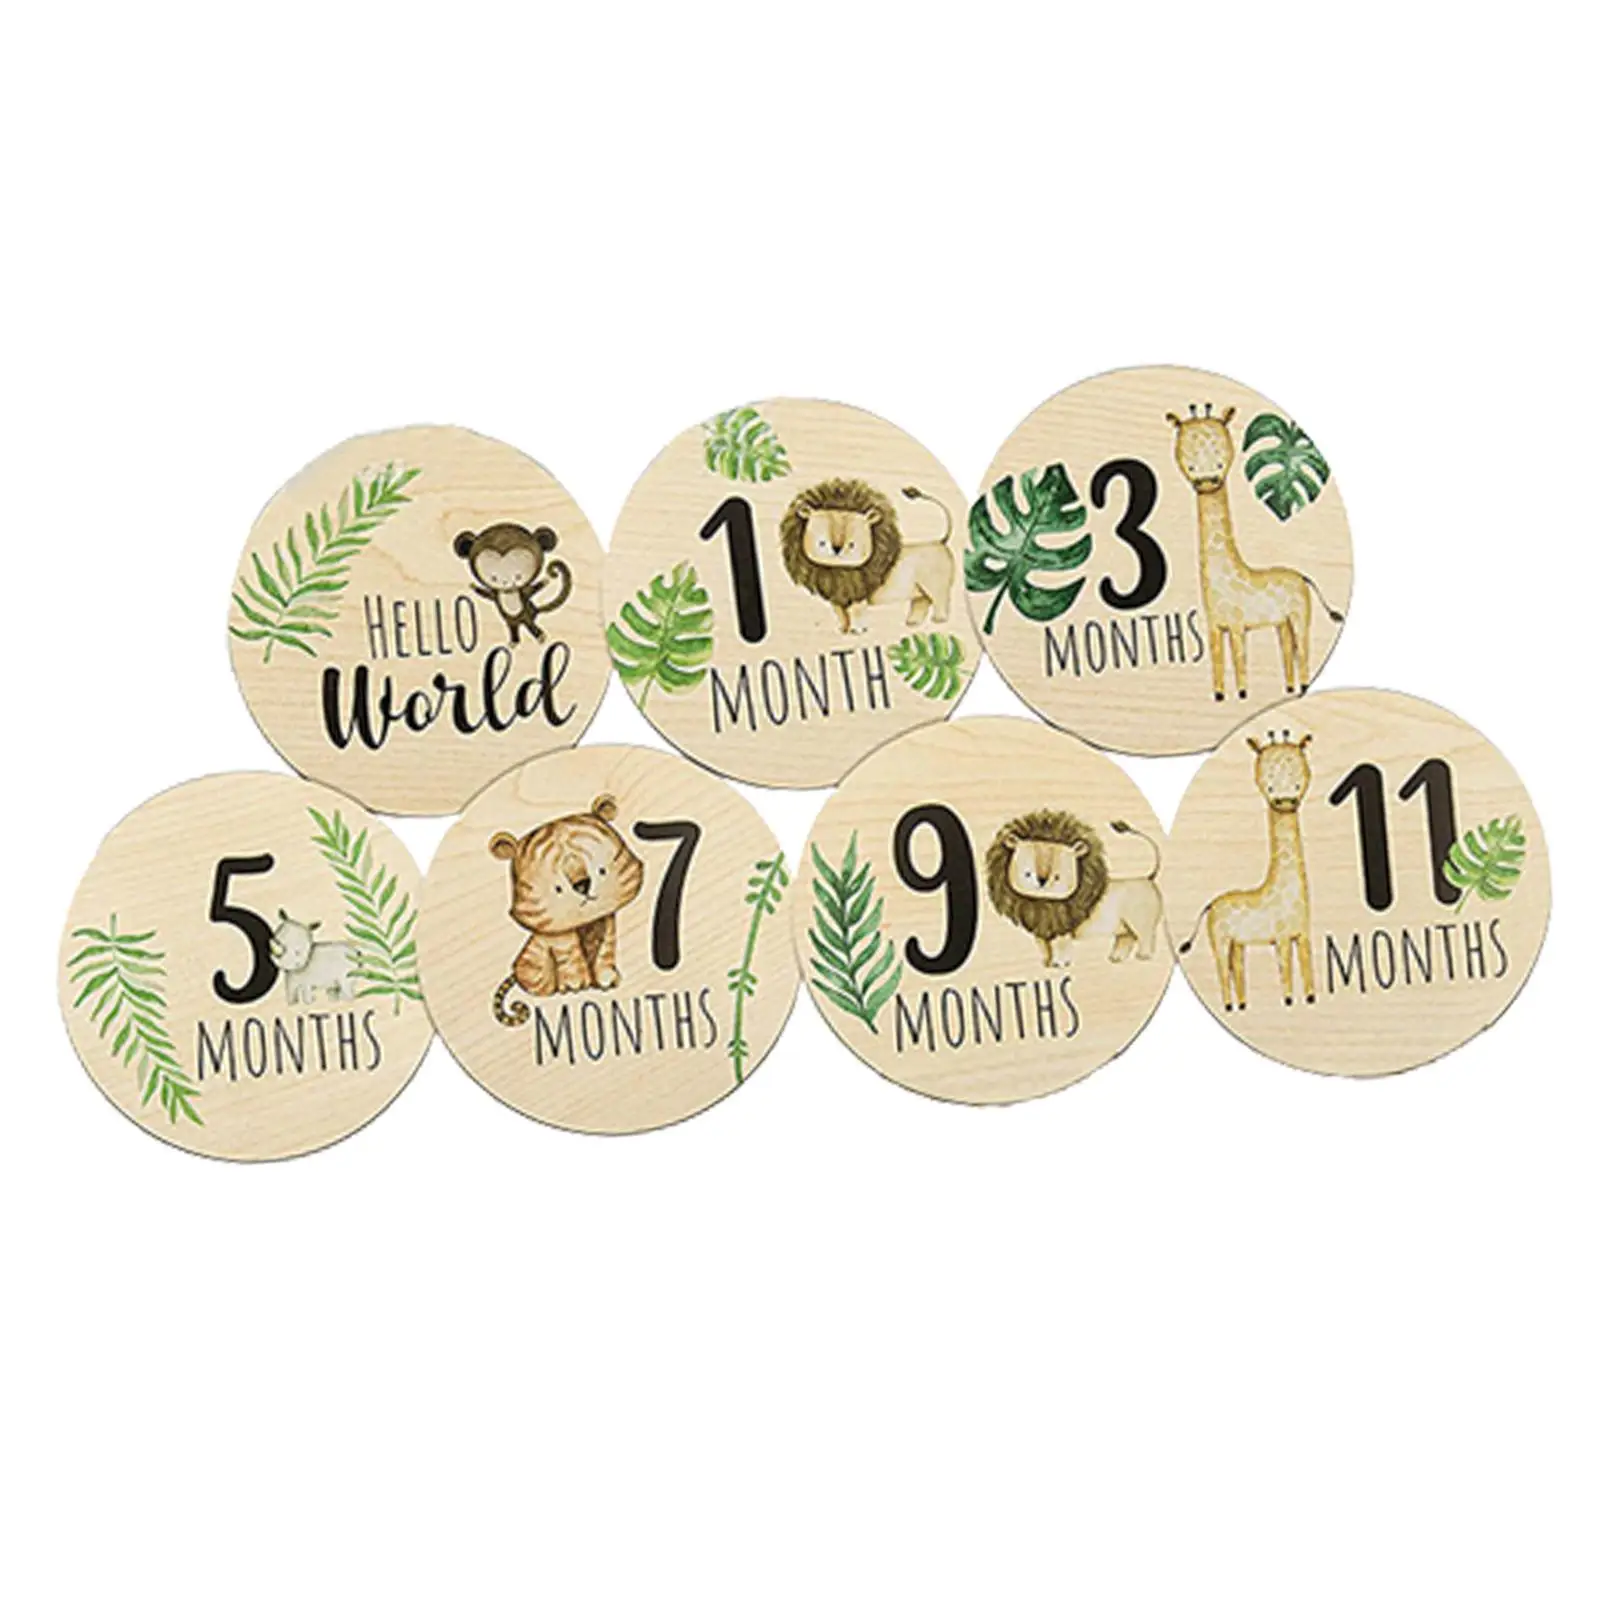 7 Pieces Baby Milestone Cards Baby Months Signs Milestone Markers Discs for Baby Shower Newborn Photo Props